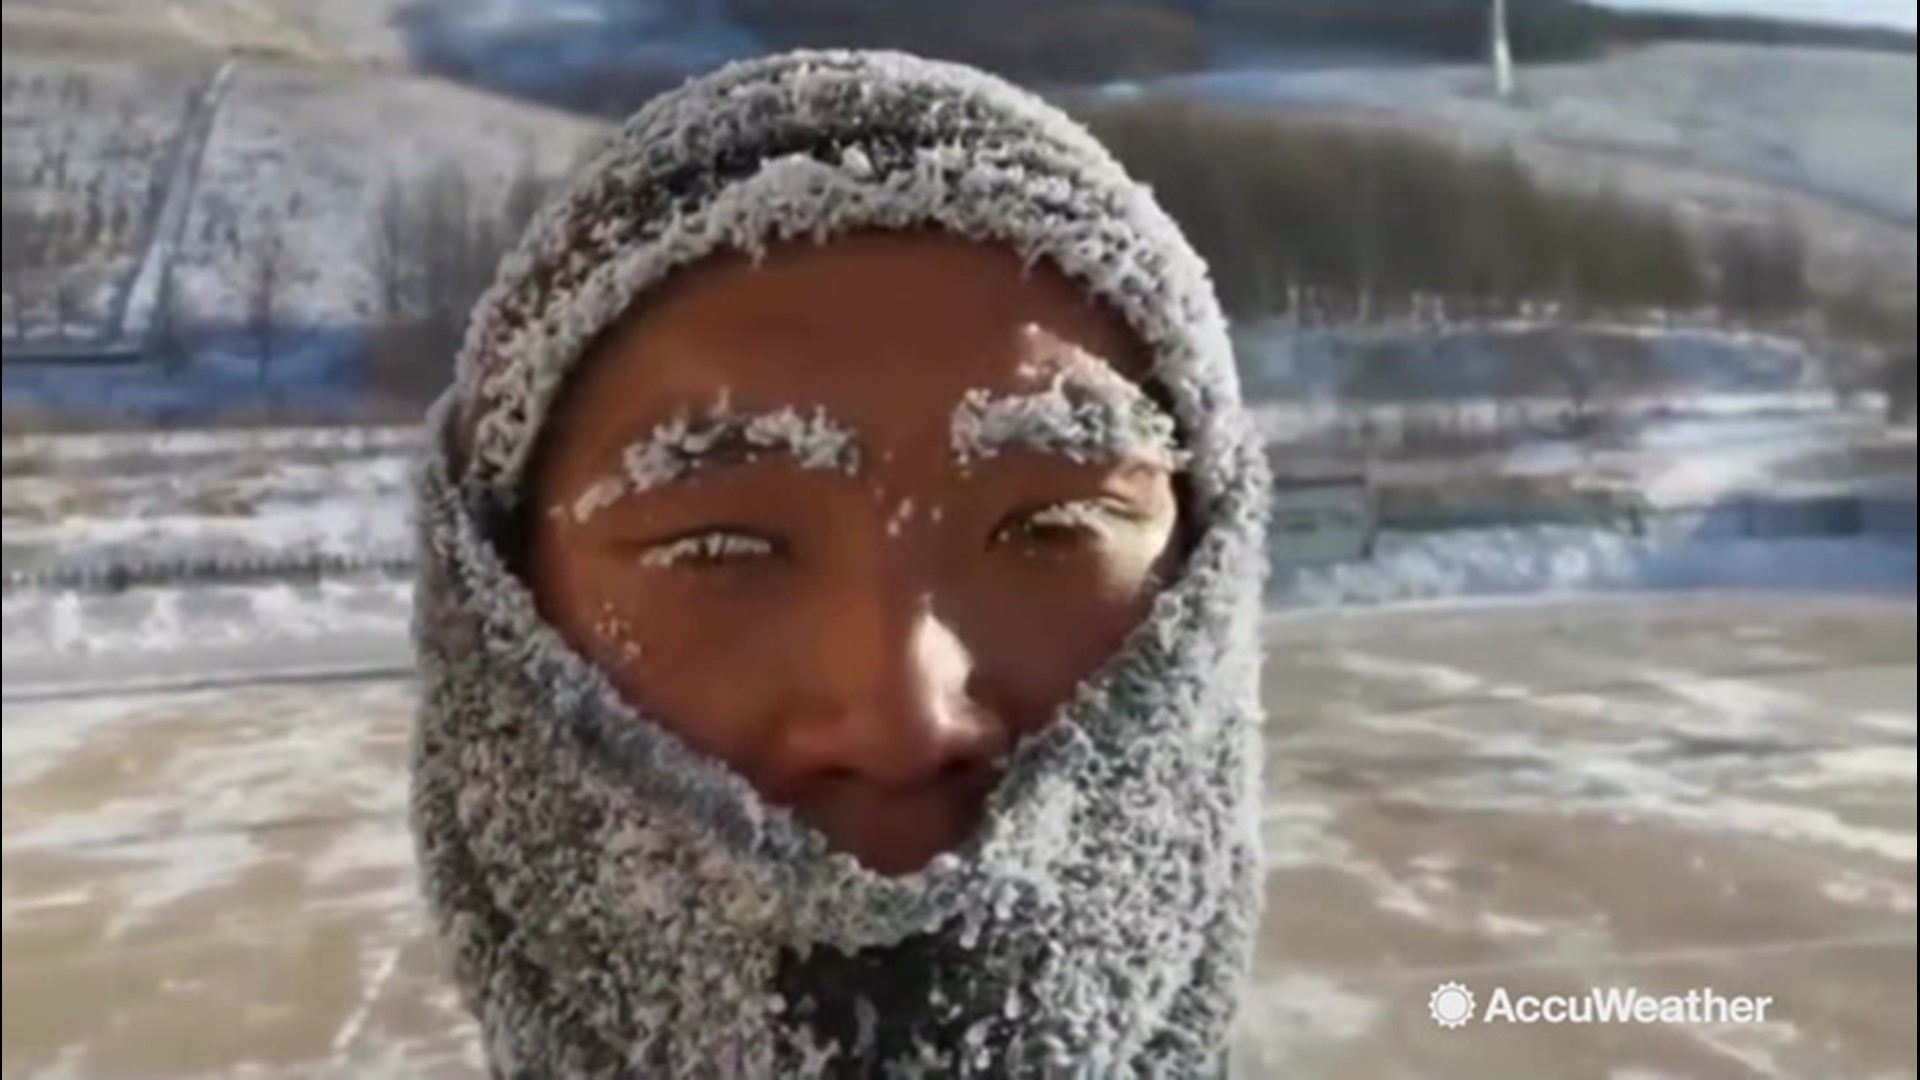 On Dec. 4, a group of firefighters from Inner Mongolia, China, trained in sub-zero temperatures that left them looking like popsicles at the end of their run.